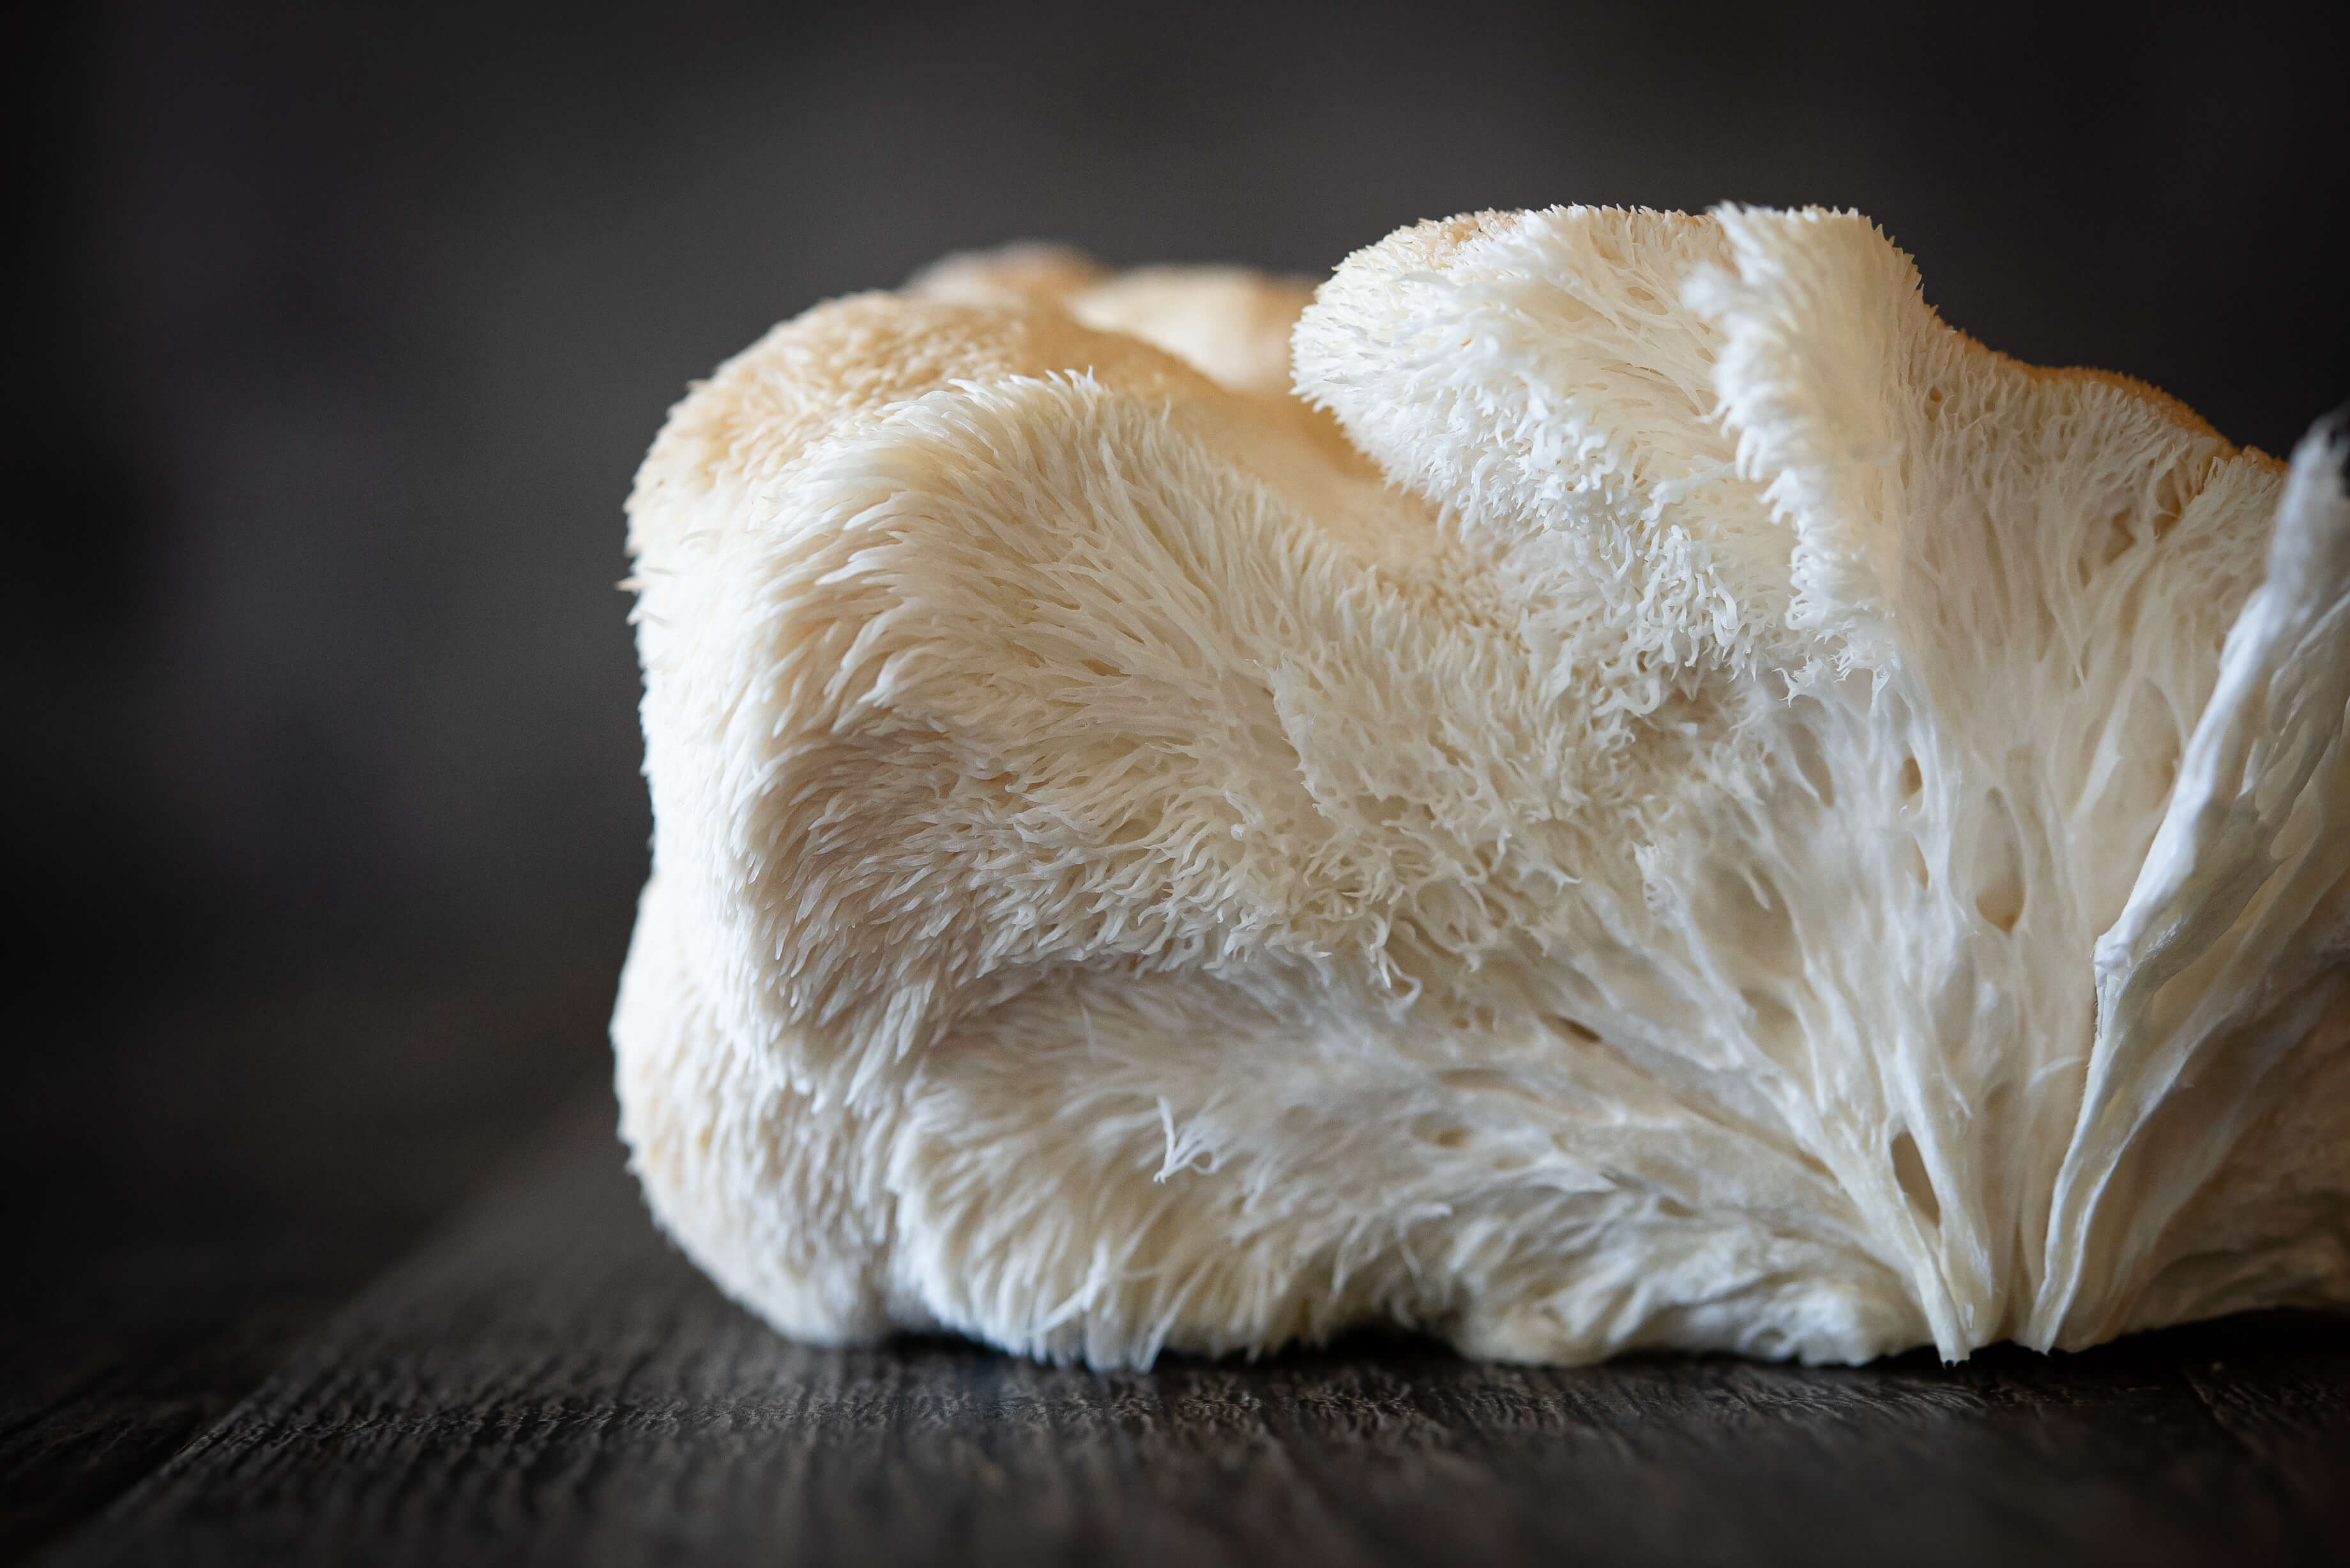 Explore Wholesale fake mushroom Options Available For You